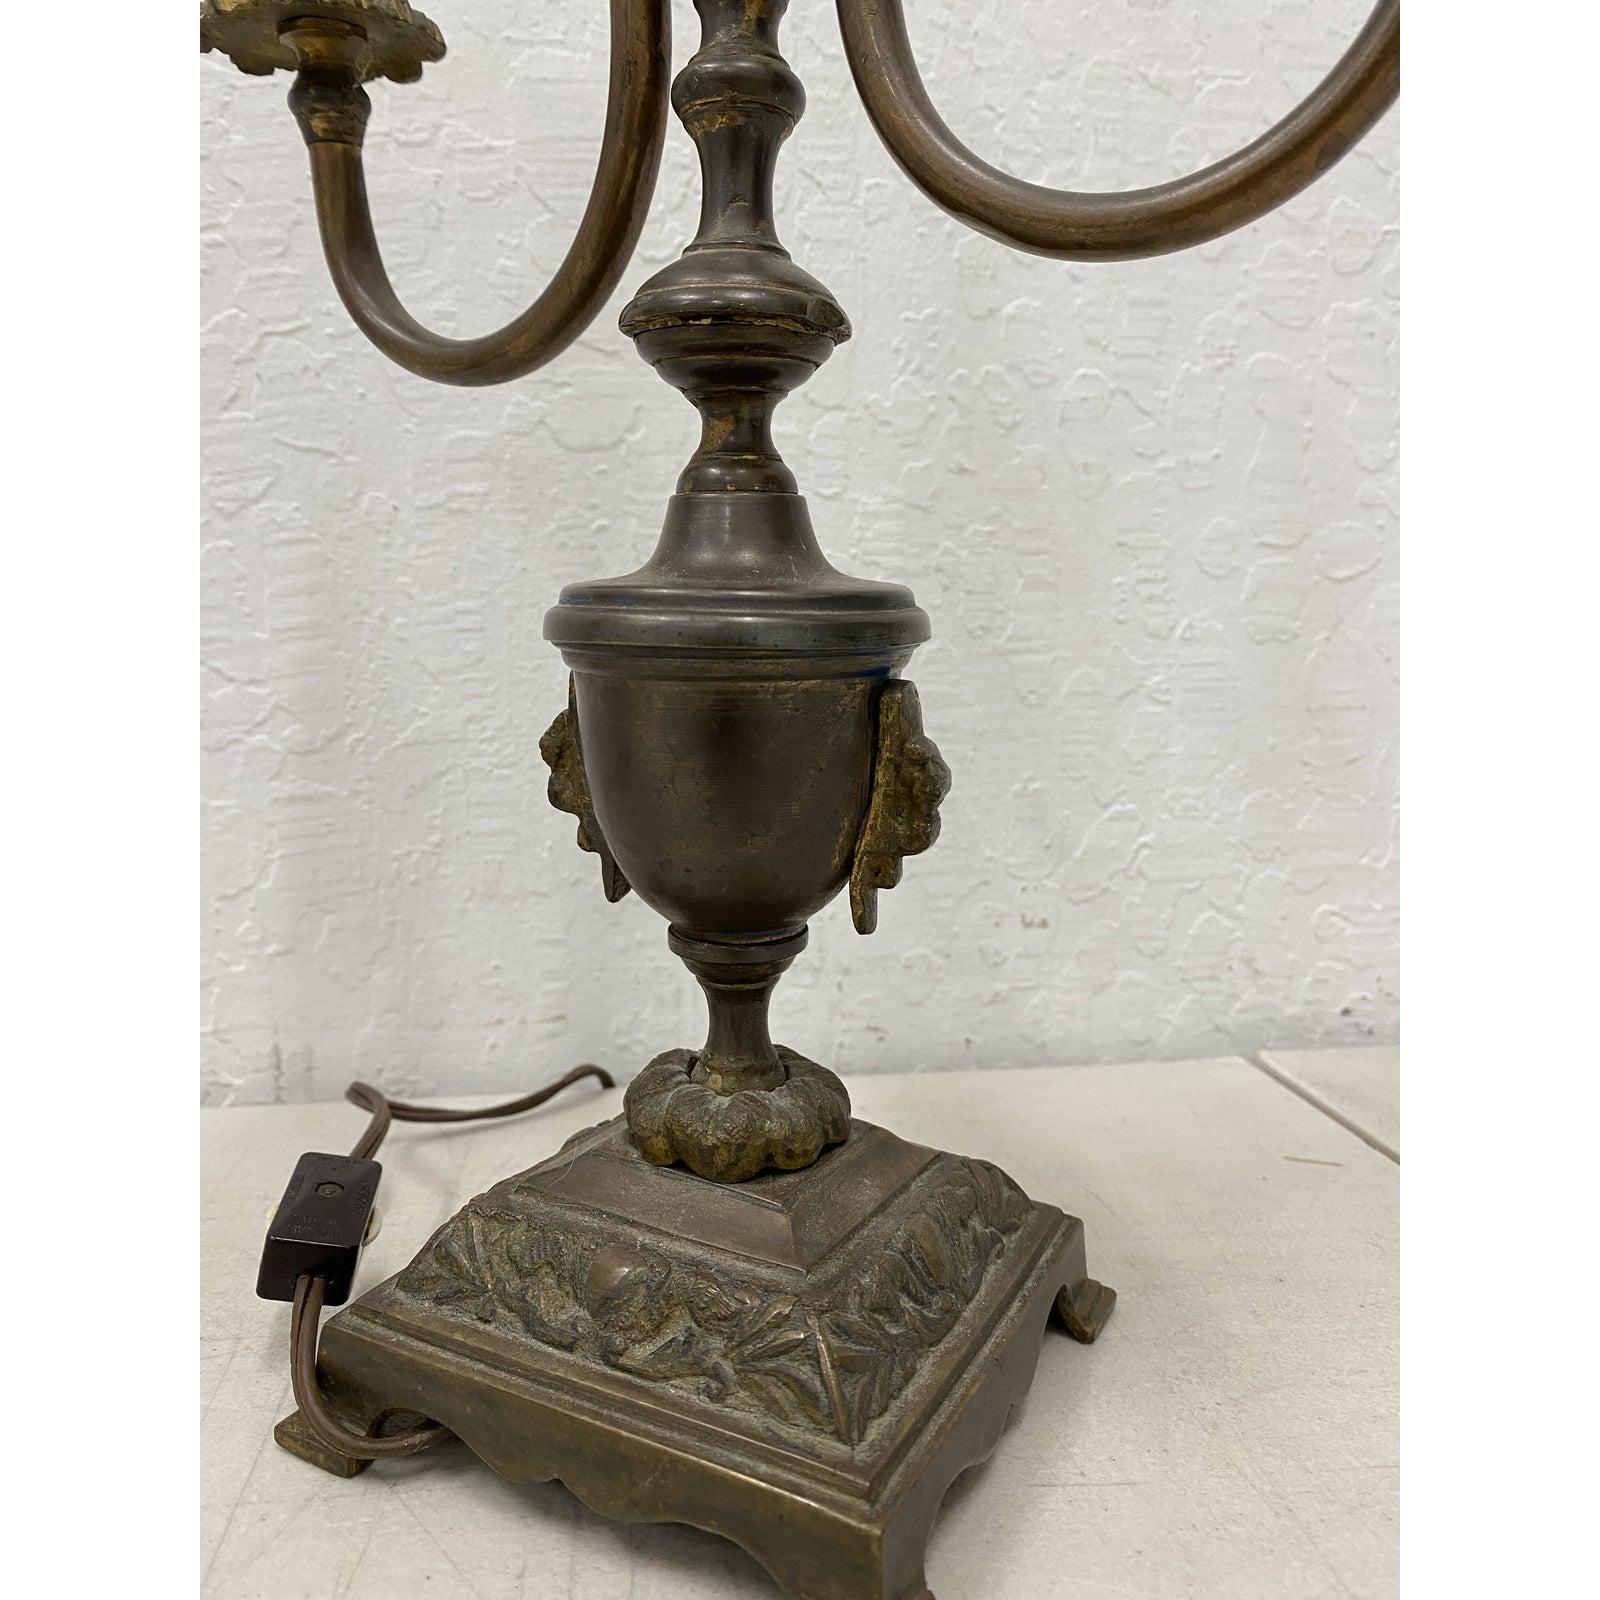 Cast Antique Patinated Brass Classical Urn Candelabras Converted to Table Lamps